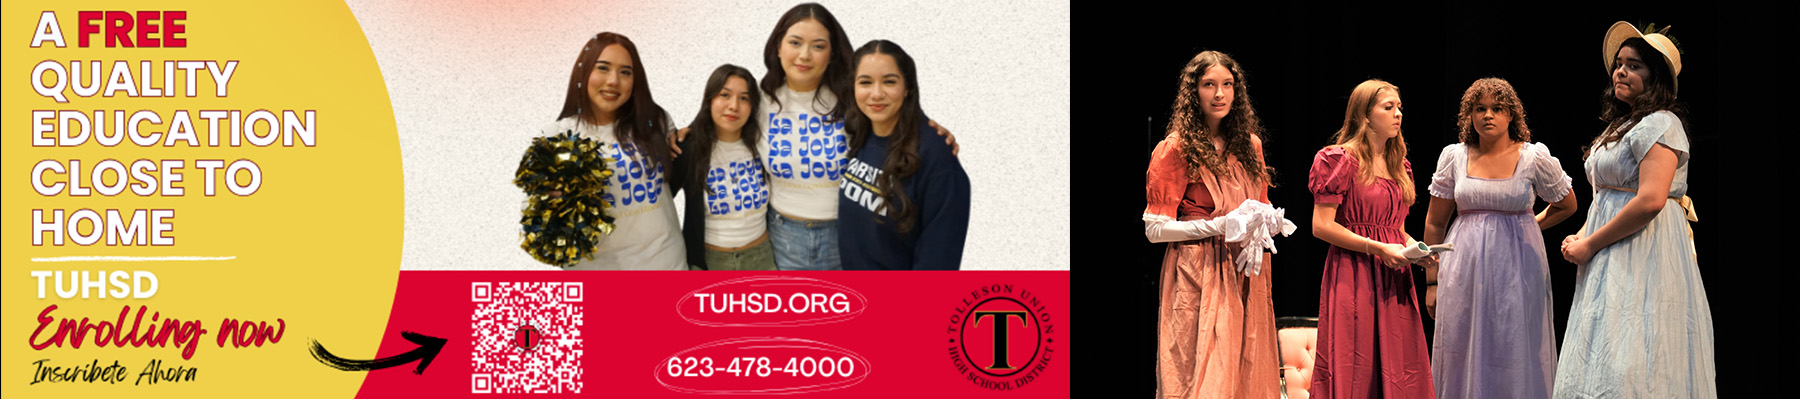 A free quality education close to home - TUHSD Enrolling now | Inscribete Ahora - tuhsd.org - 623-478-4000 | Four girls in dresses on stage